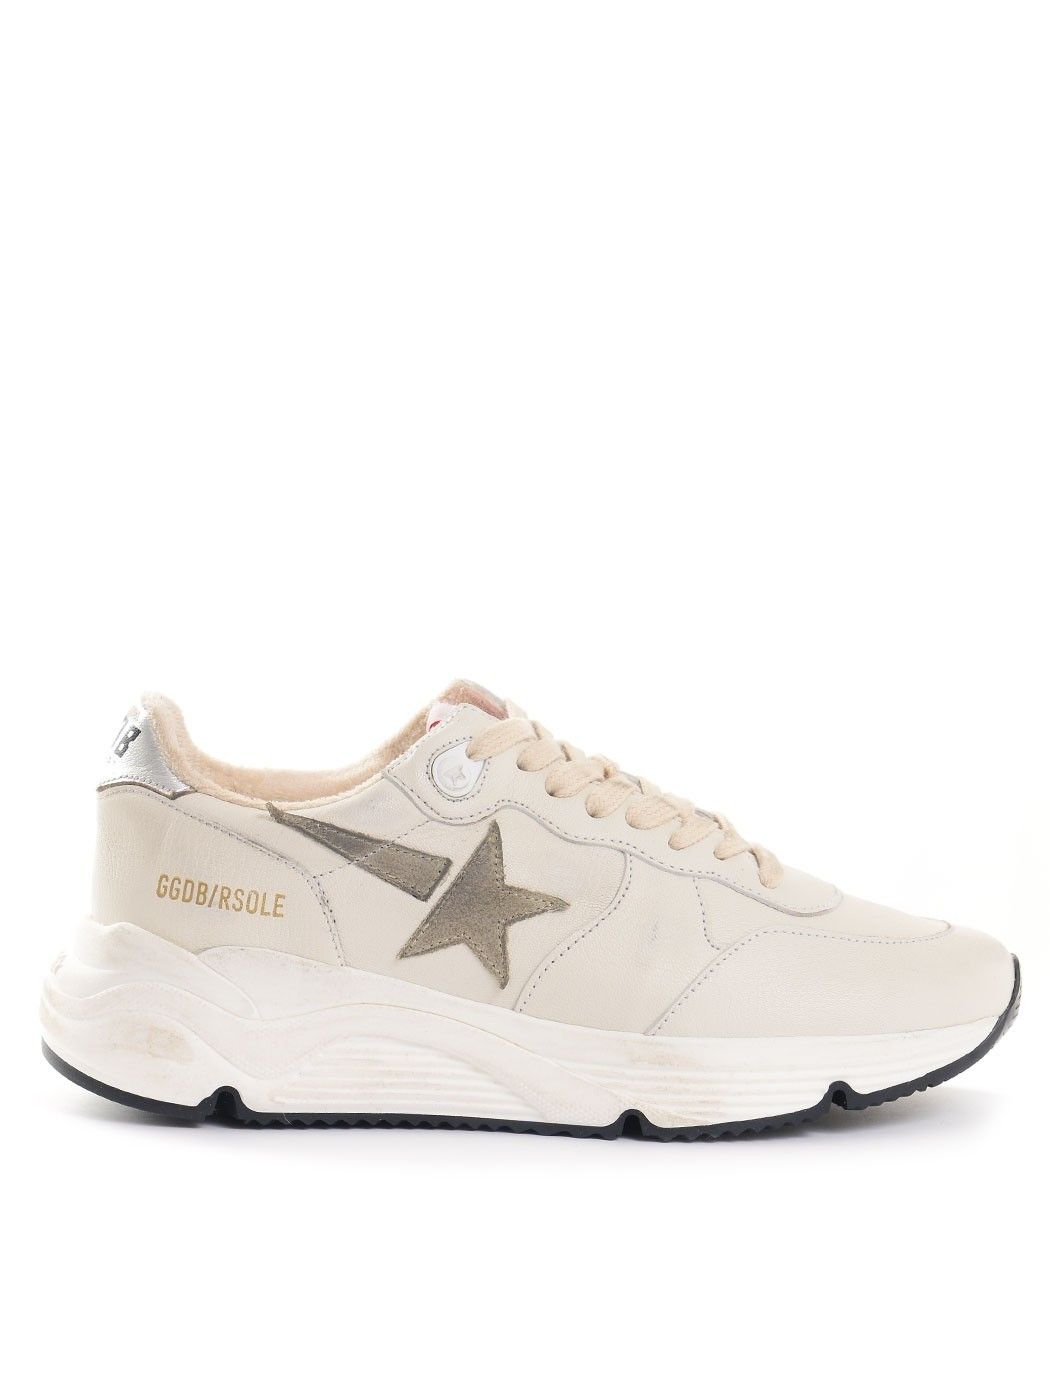  WOMAN SHOES,GIVENCHY SHOES,GOLDEN GOOSE SHOES,MARNI SHOES  GOLDEN GOOSE GWF00215